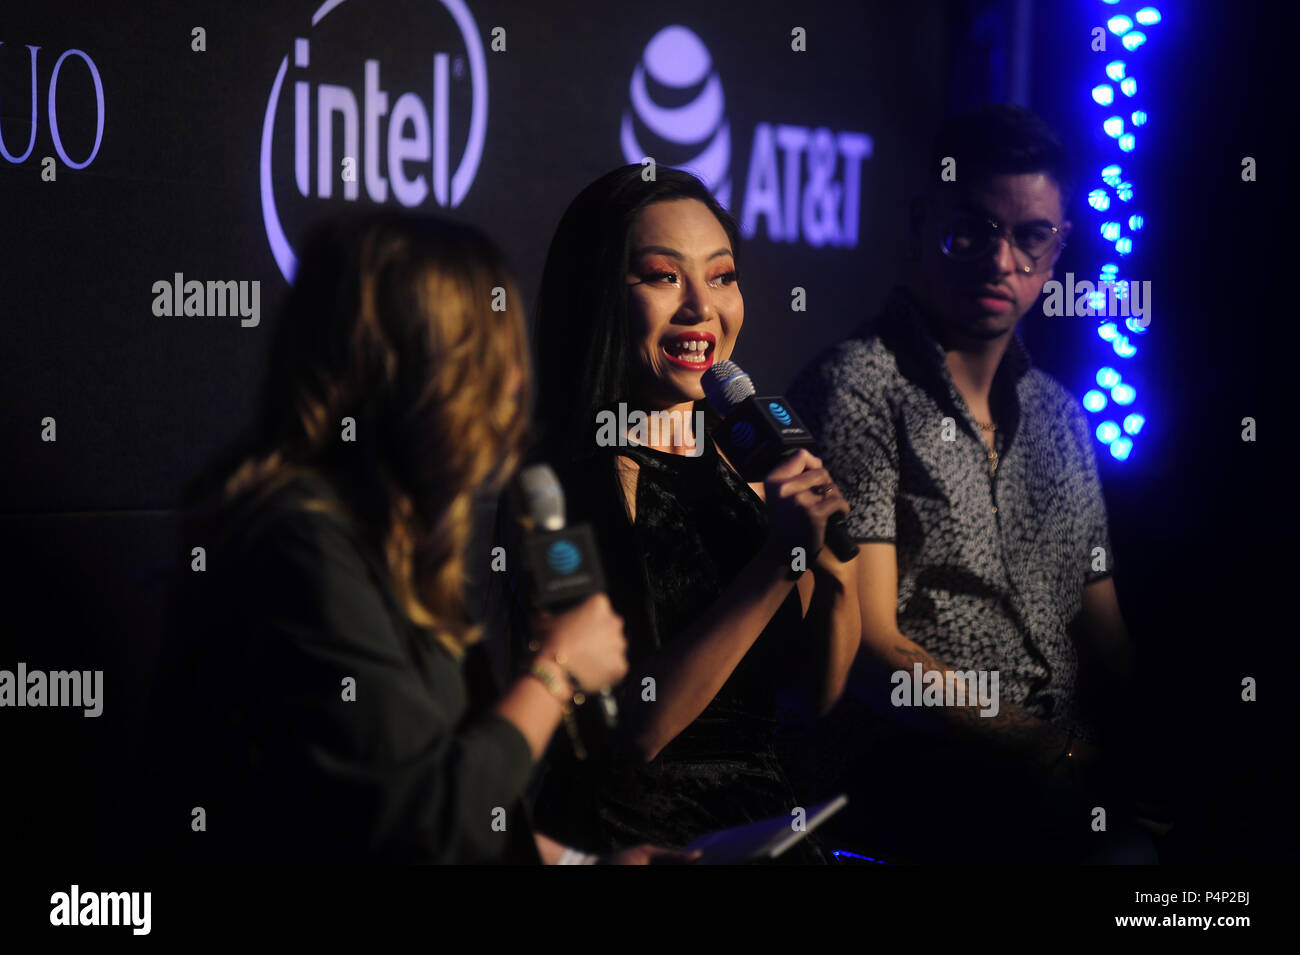 San Francisco, California, USA. 22nd June, 2018. Cellist TINA GUO takes questions from fans before her Pride weekend kick-off concert at AT&T's 1 Powell store. The store is housed in one of San Francisco's oldest buildings and was originally the home of Bank of Italy before it became Bank of America after the 1906 earthquake and fire. AT&T spent 6 months renovating and restoring the building's lobby before opening their flagship store. Credit: Neal Waters/ZUMA Wire/Alamy Live News Stock Photo